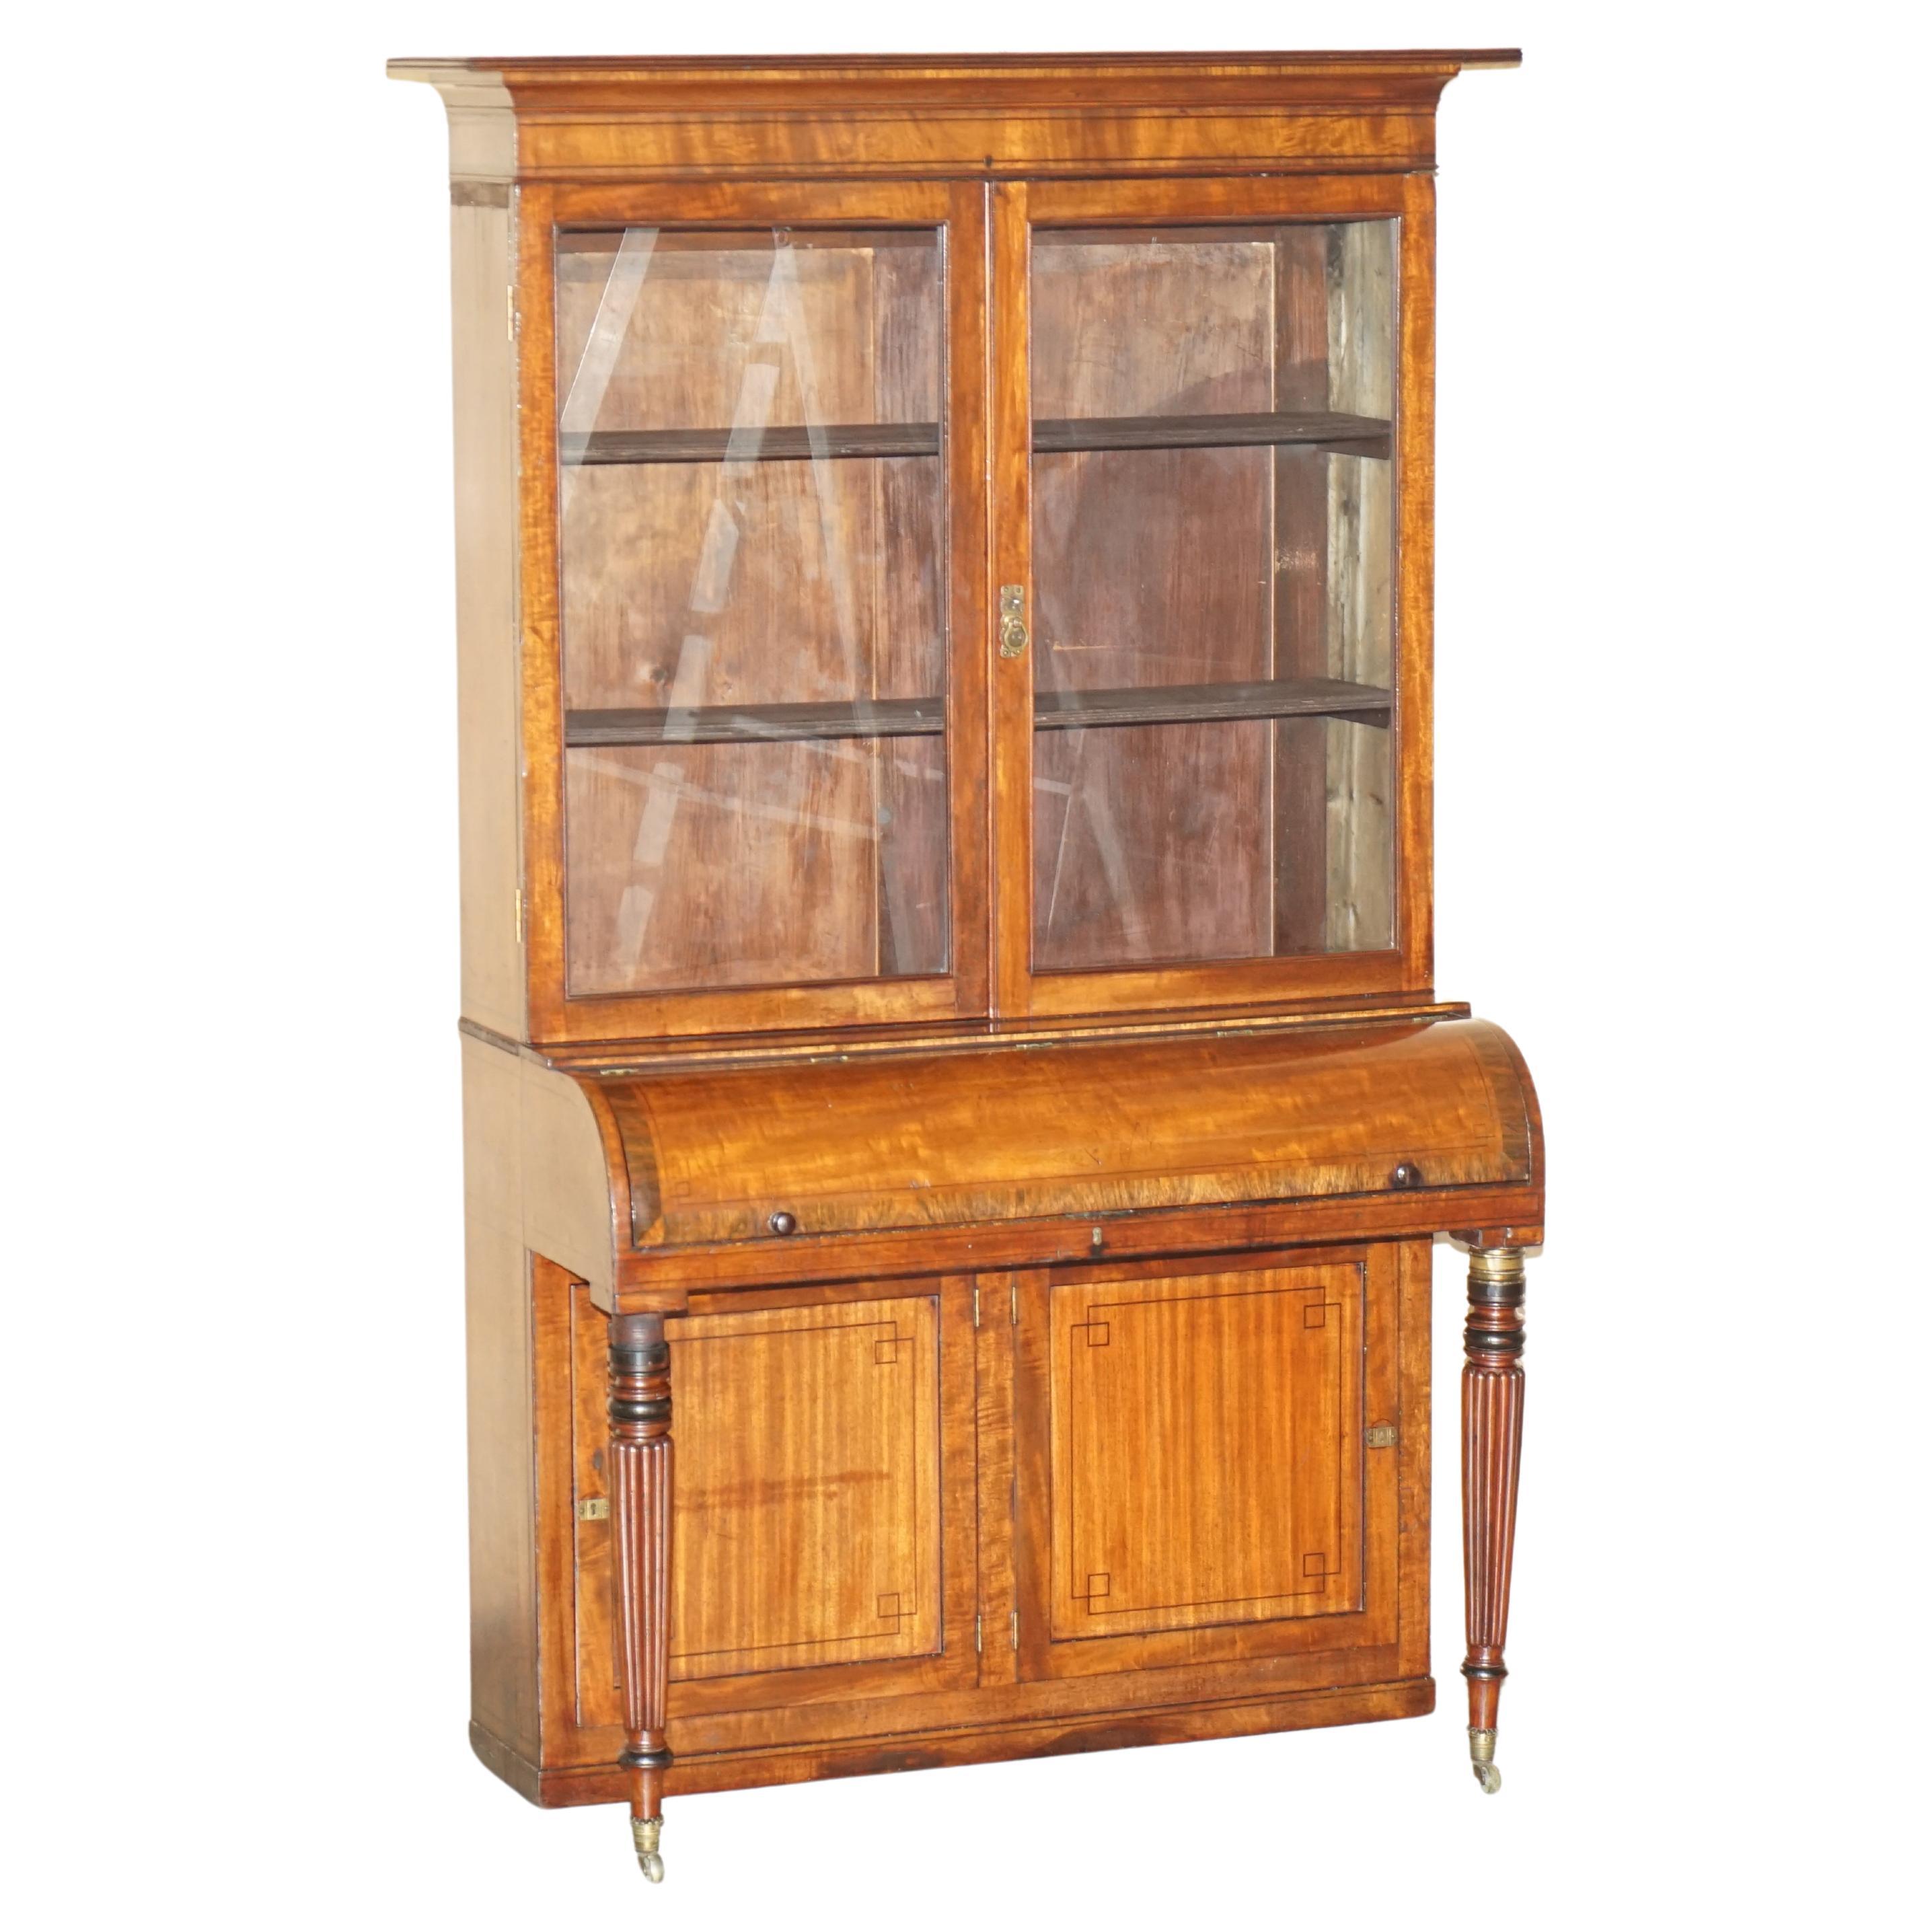 ANTIQUE ViCTORIAN 1860 WALNUT SCRIBAN BUREAU BOOKCASE MUST SEE PICTURES For Sale